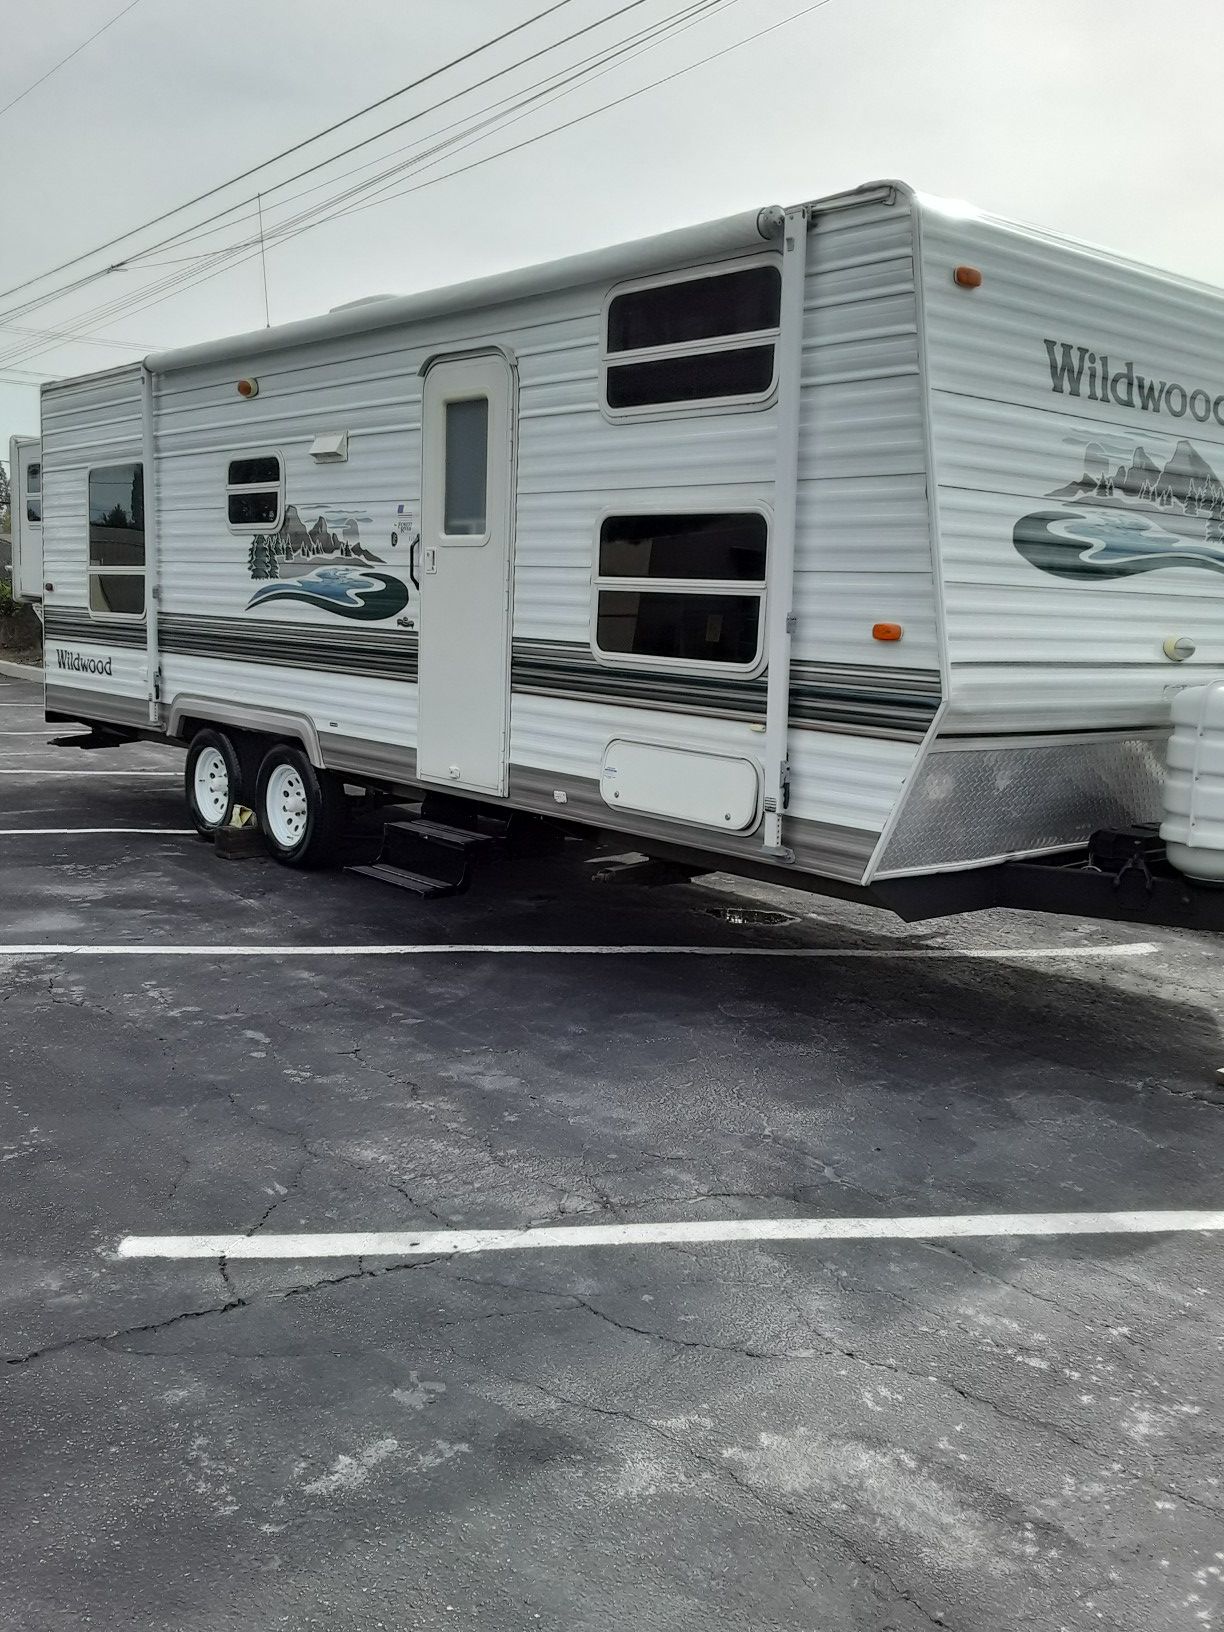 1 Owner 2005 Wildwood 25 foot bunkhouse with slide out